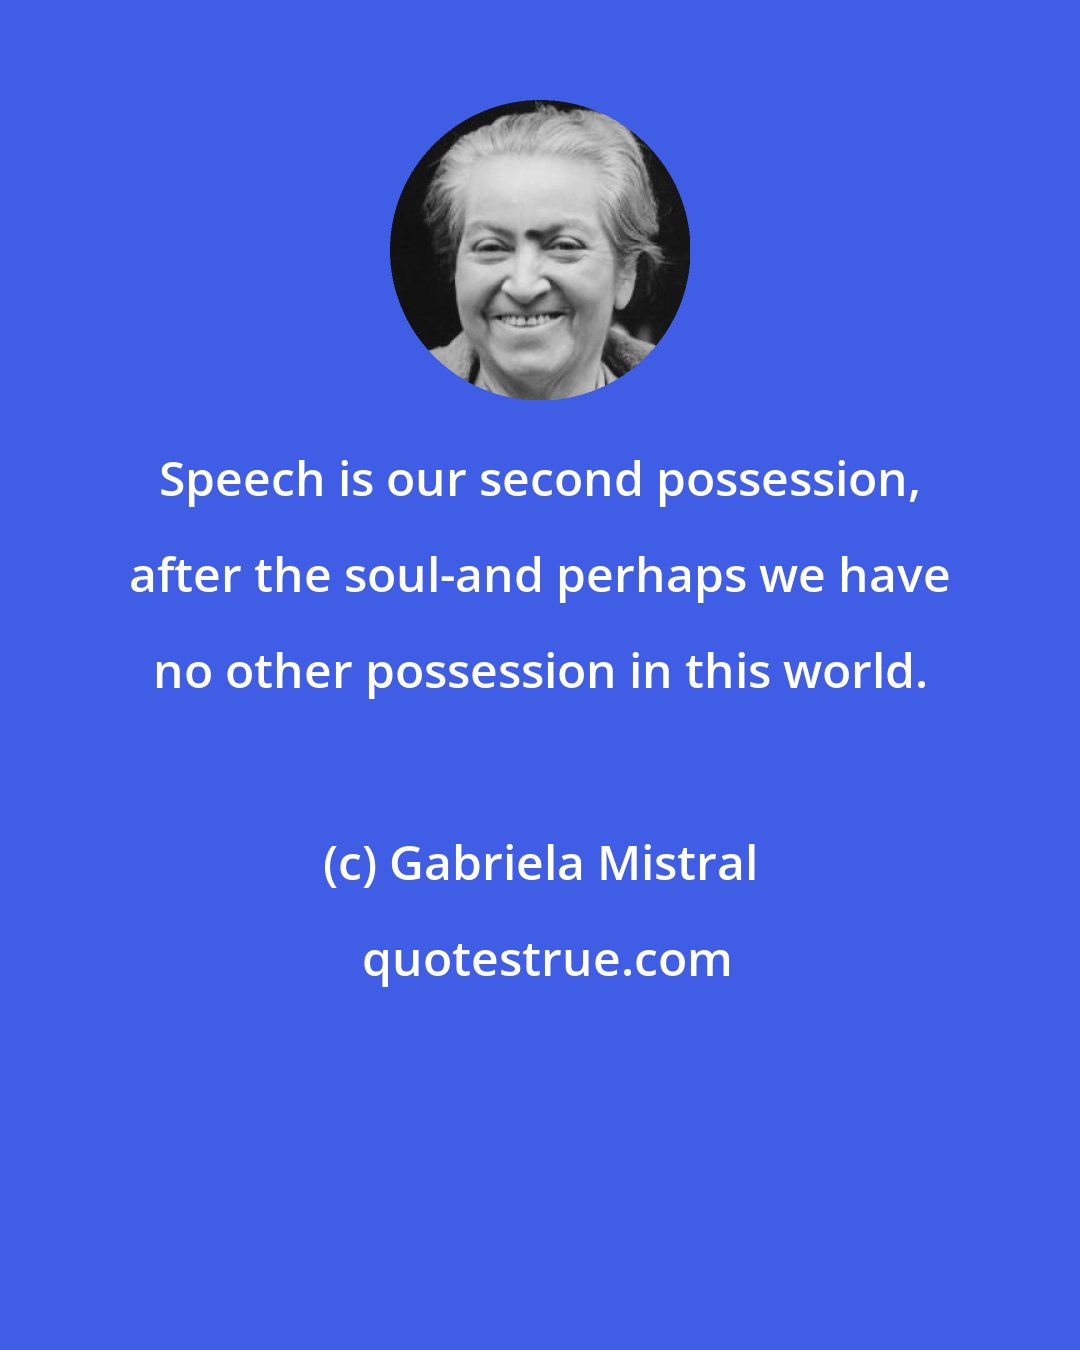 Gabriela Mistral: Speech is our second possession, after the soul-and perhaps we have no other possession in this world.